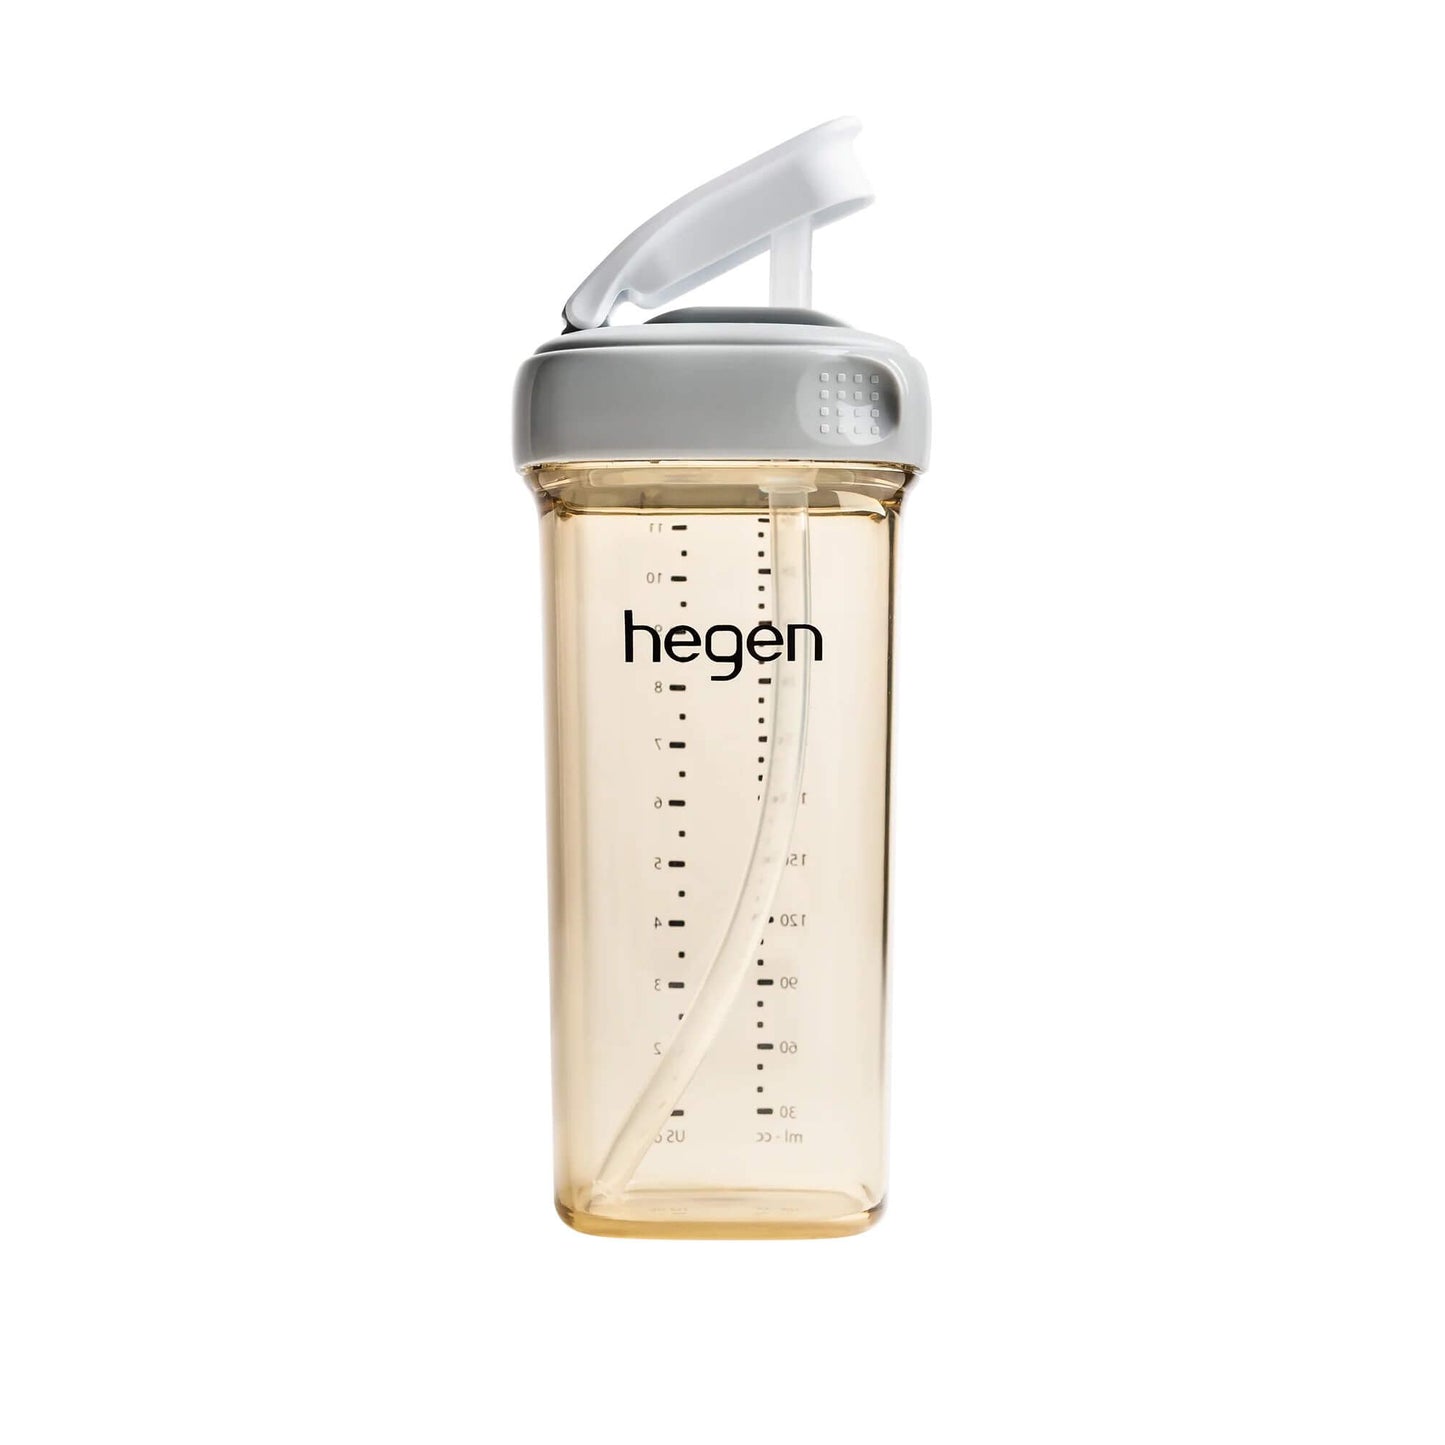 Hegen's Straw Cup, with a unique one-hand closure—just Press-to-Close, Twist-to-Open. Ideal for parents with full hands and perfect for children 9 months and up transitioning from bottles to straw cups!